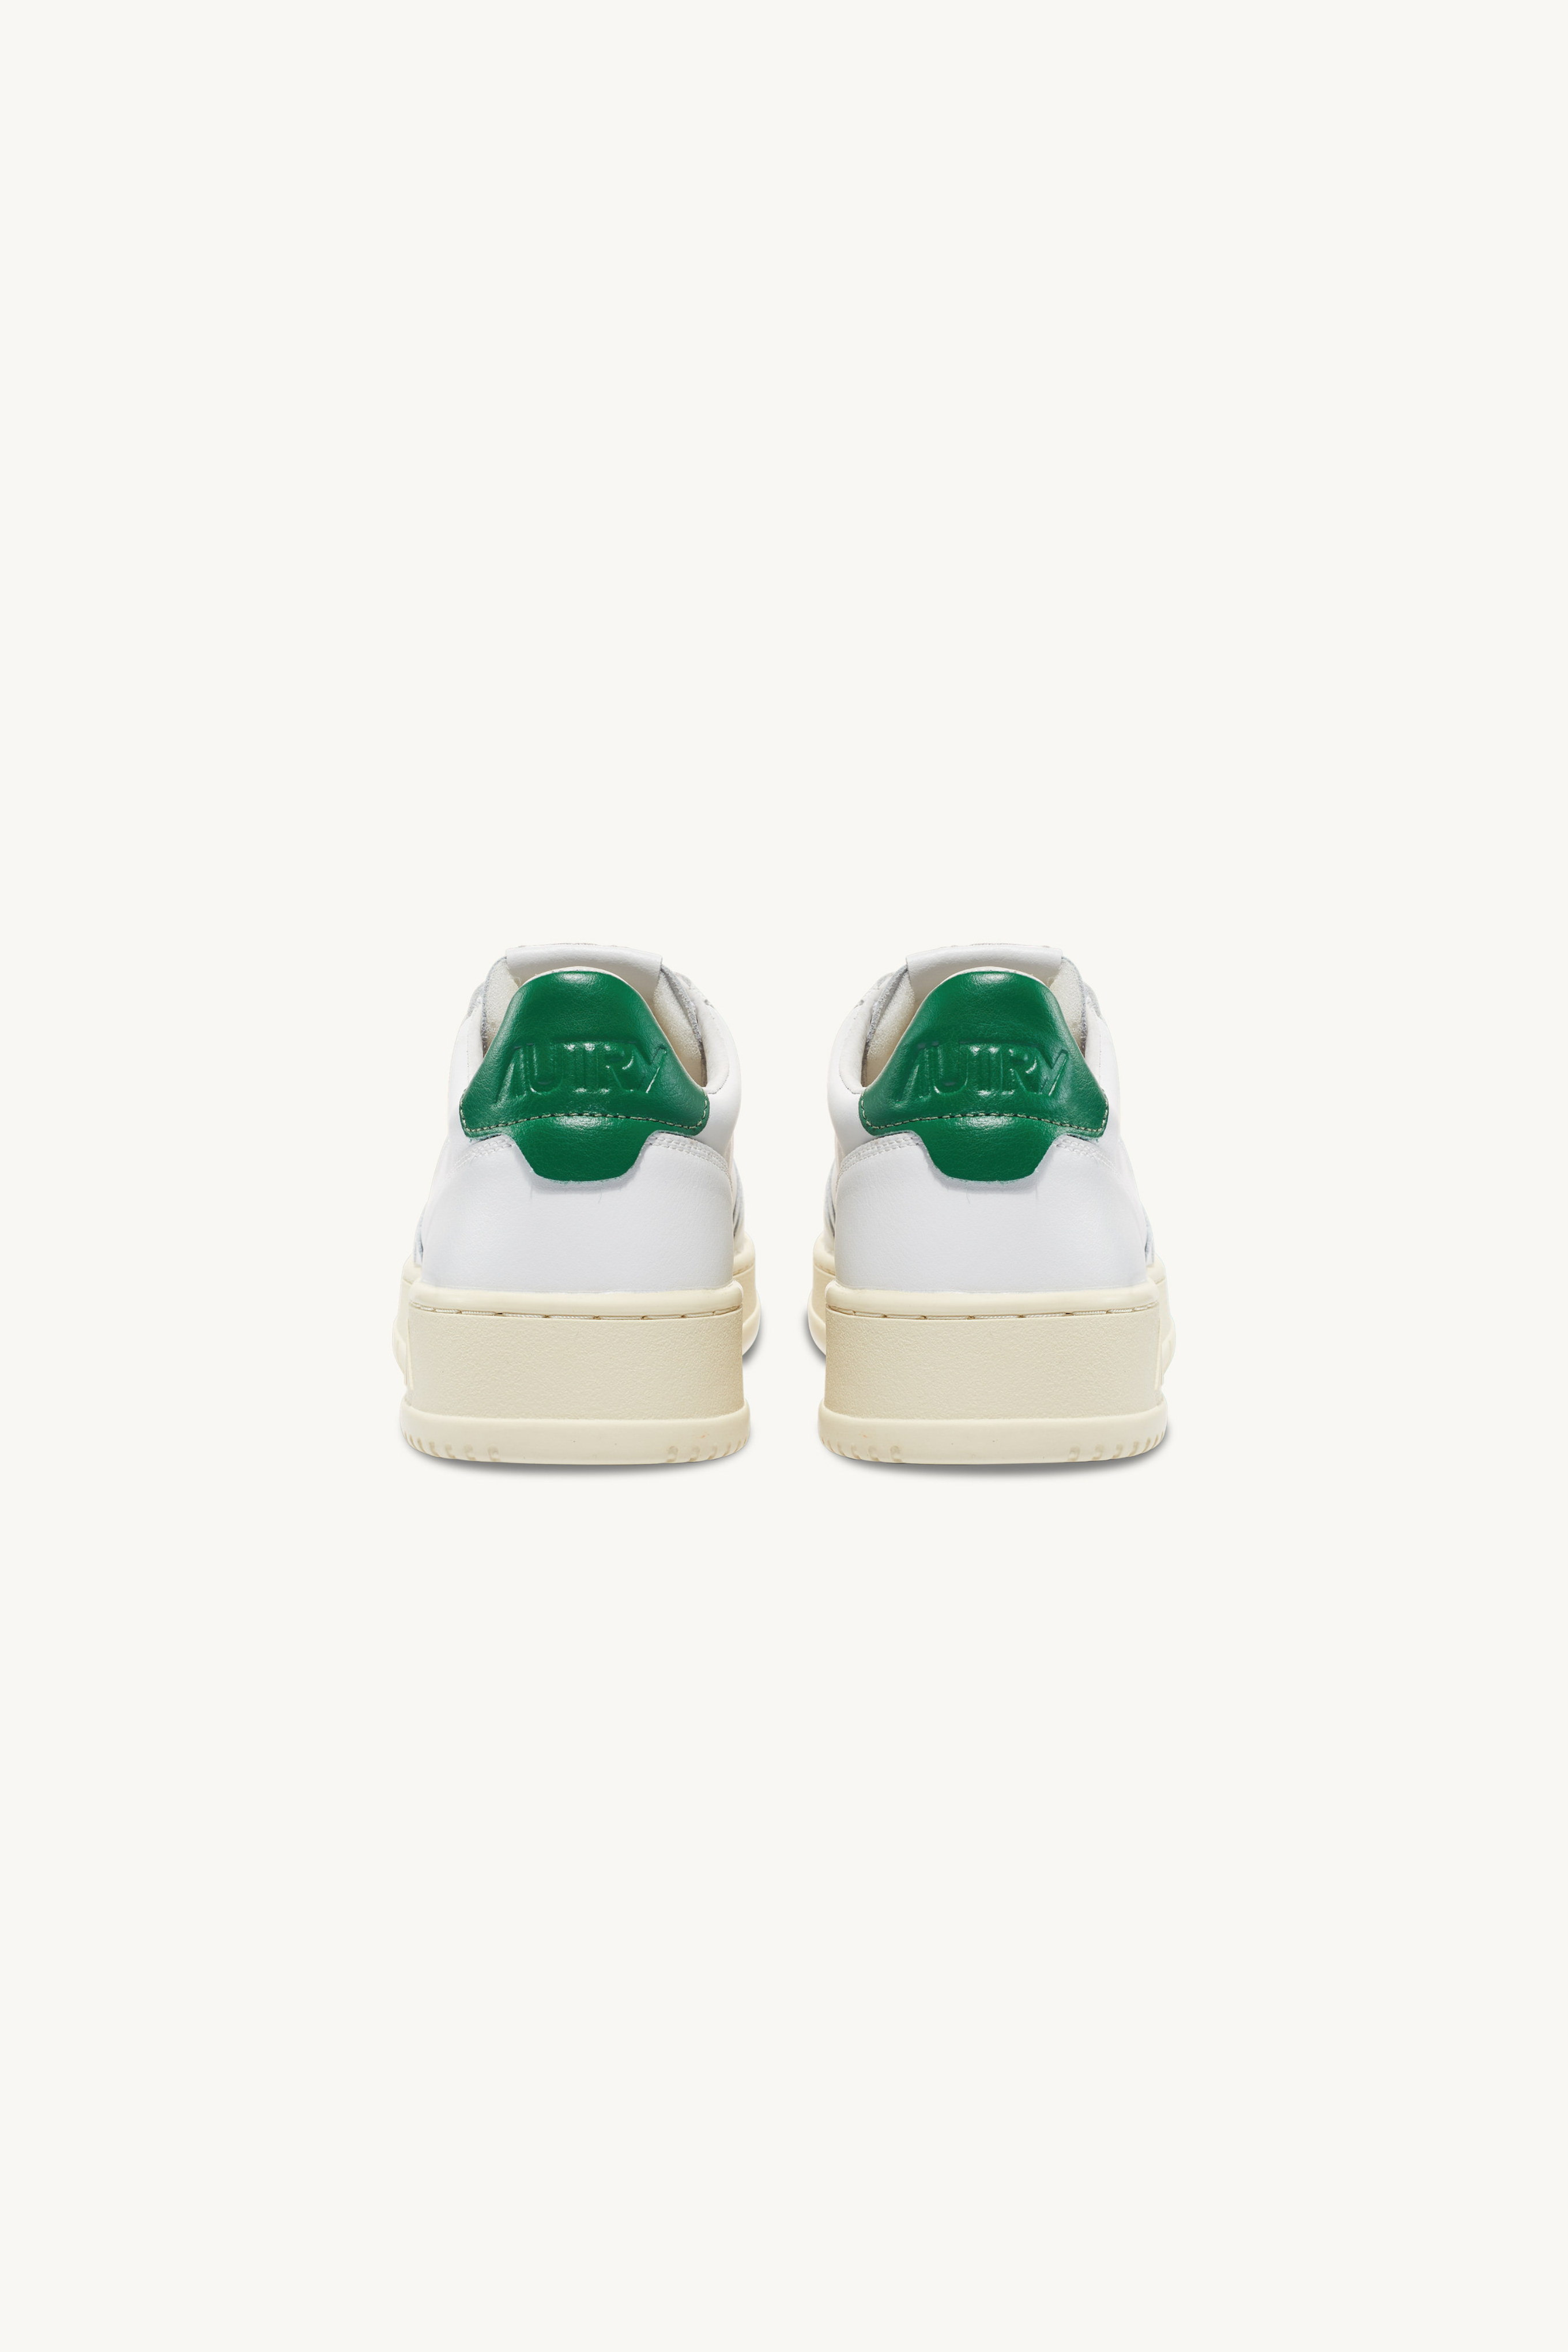 AULM-LL20 - MEDALIST LOW SNEAKERS IN LEATHER WHITE AND GREEN